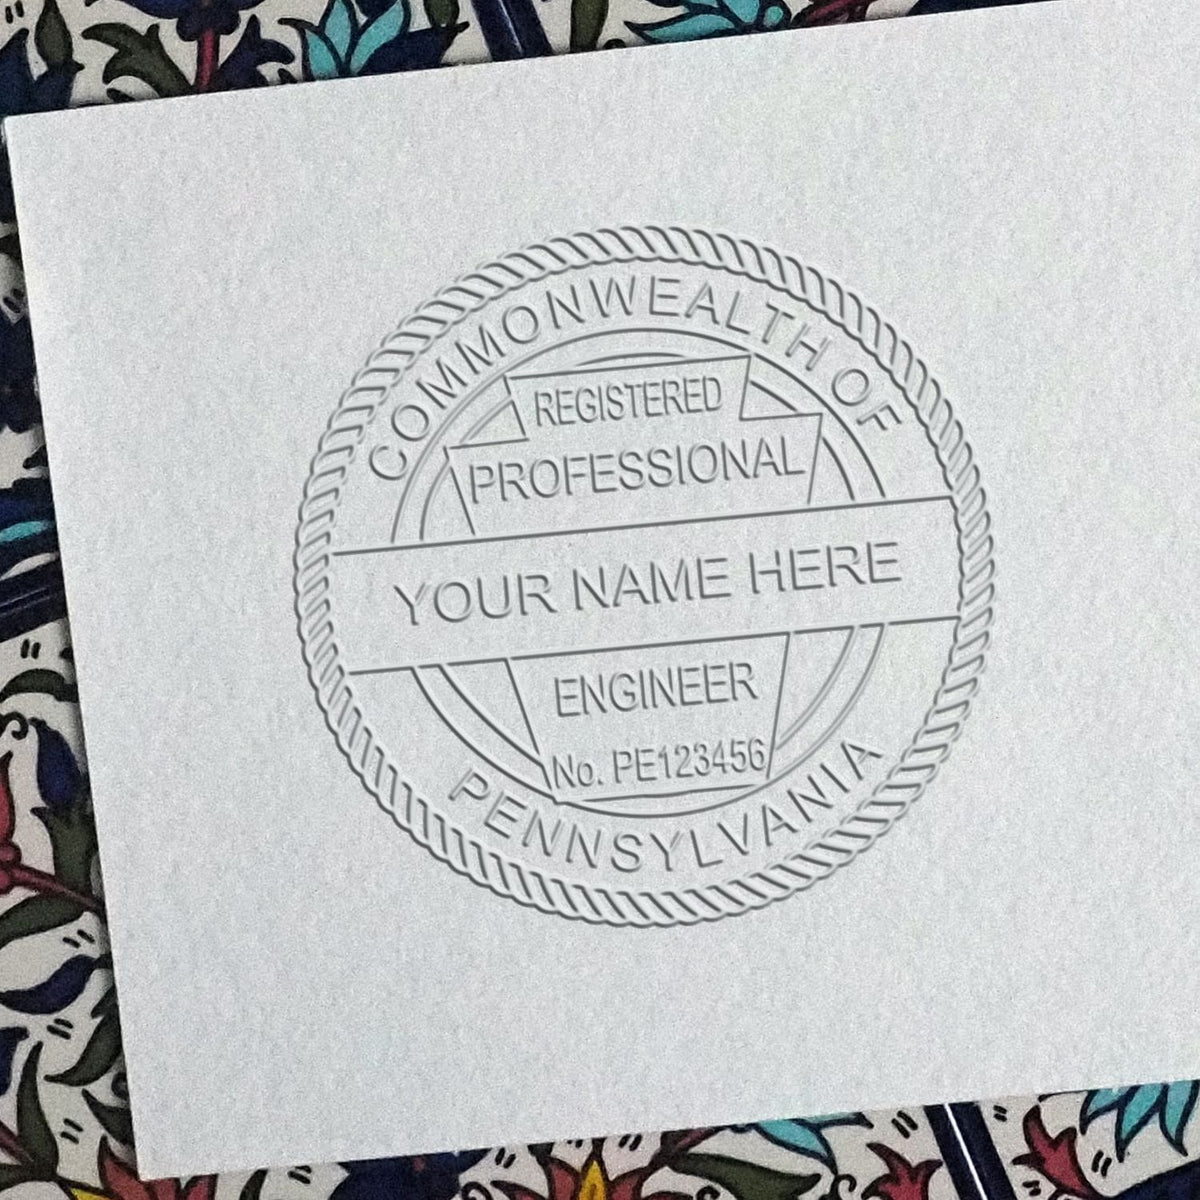 A stamped impression of the Soft Pennsylvania Professional Engineer Seal in this stylish lifestyle photo, setting the tone for a unique and personalized product.